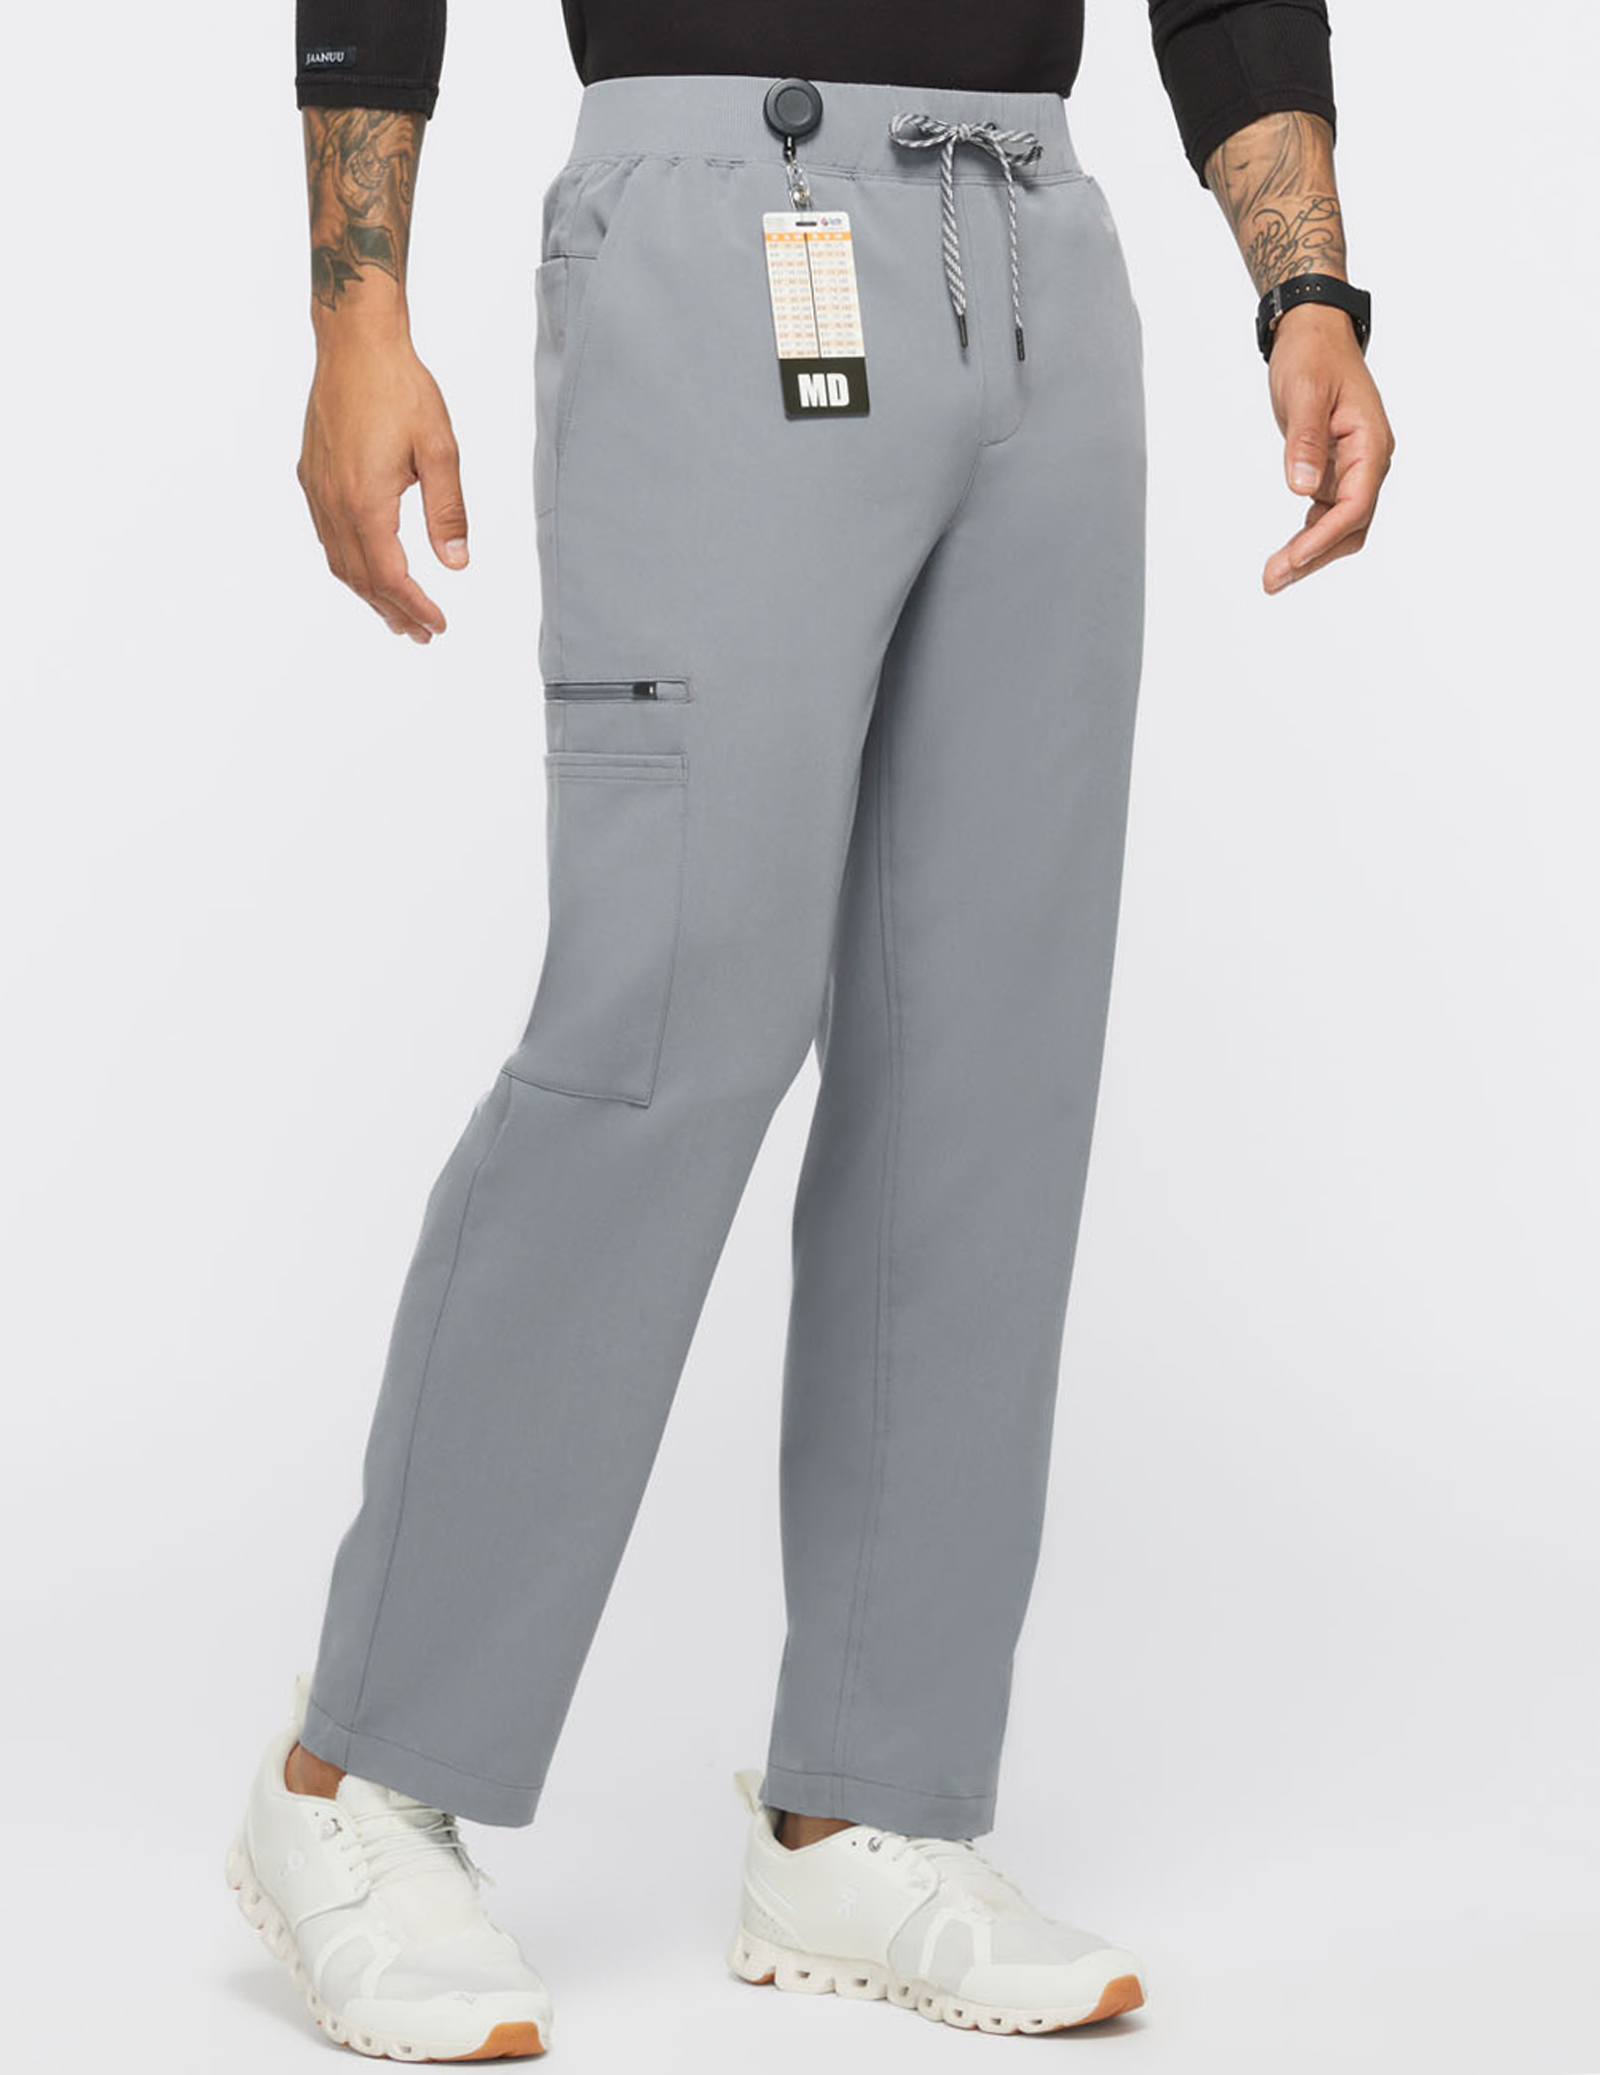 4 Scrub Pant Styles To Get You Through Your Shift